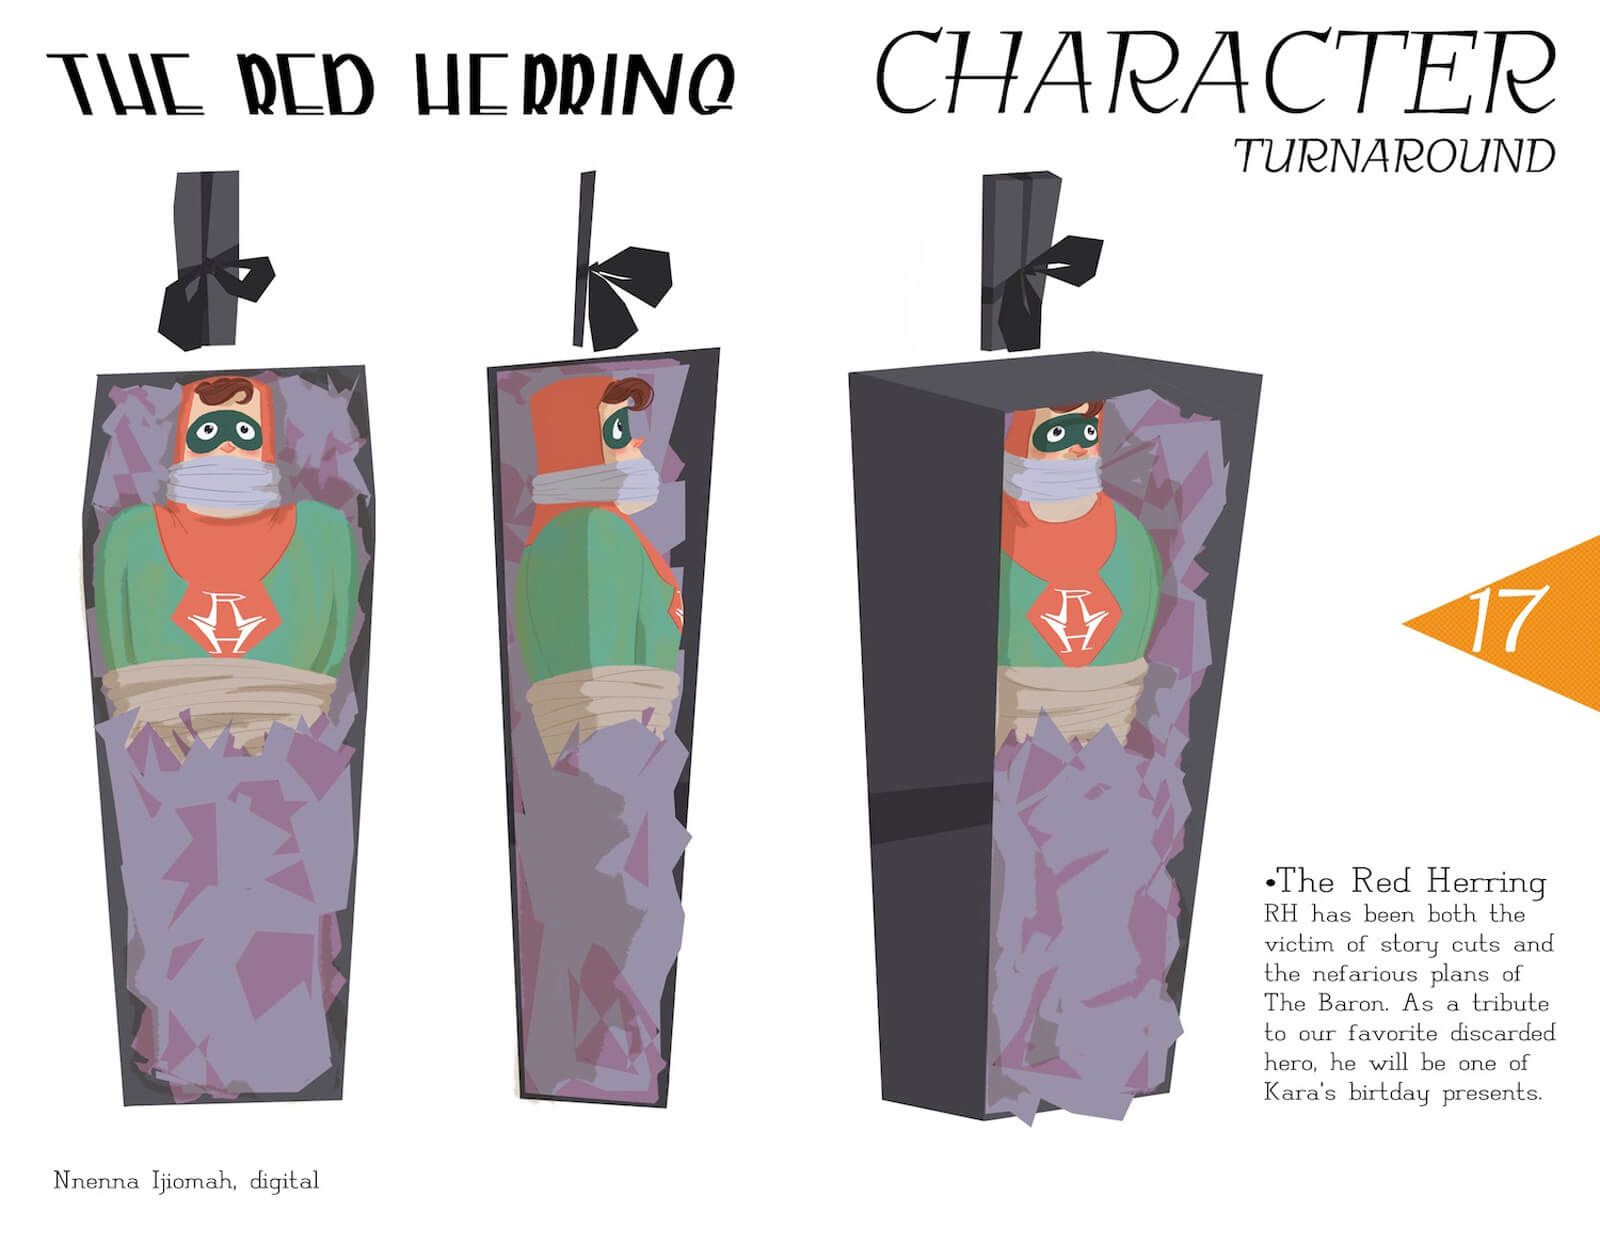 Character turnaround sheet of The Red Herring, a superhero in red and green costume tied up in a gift box